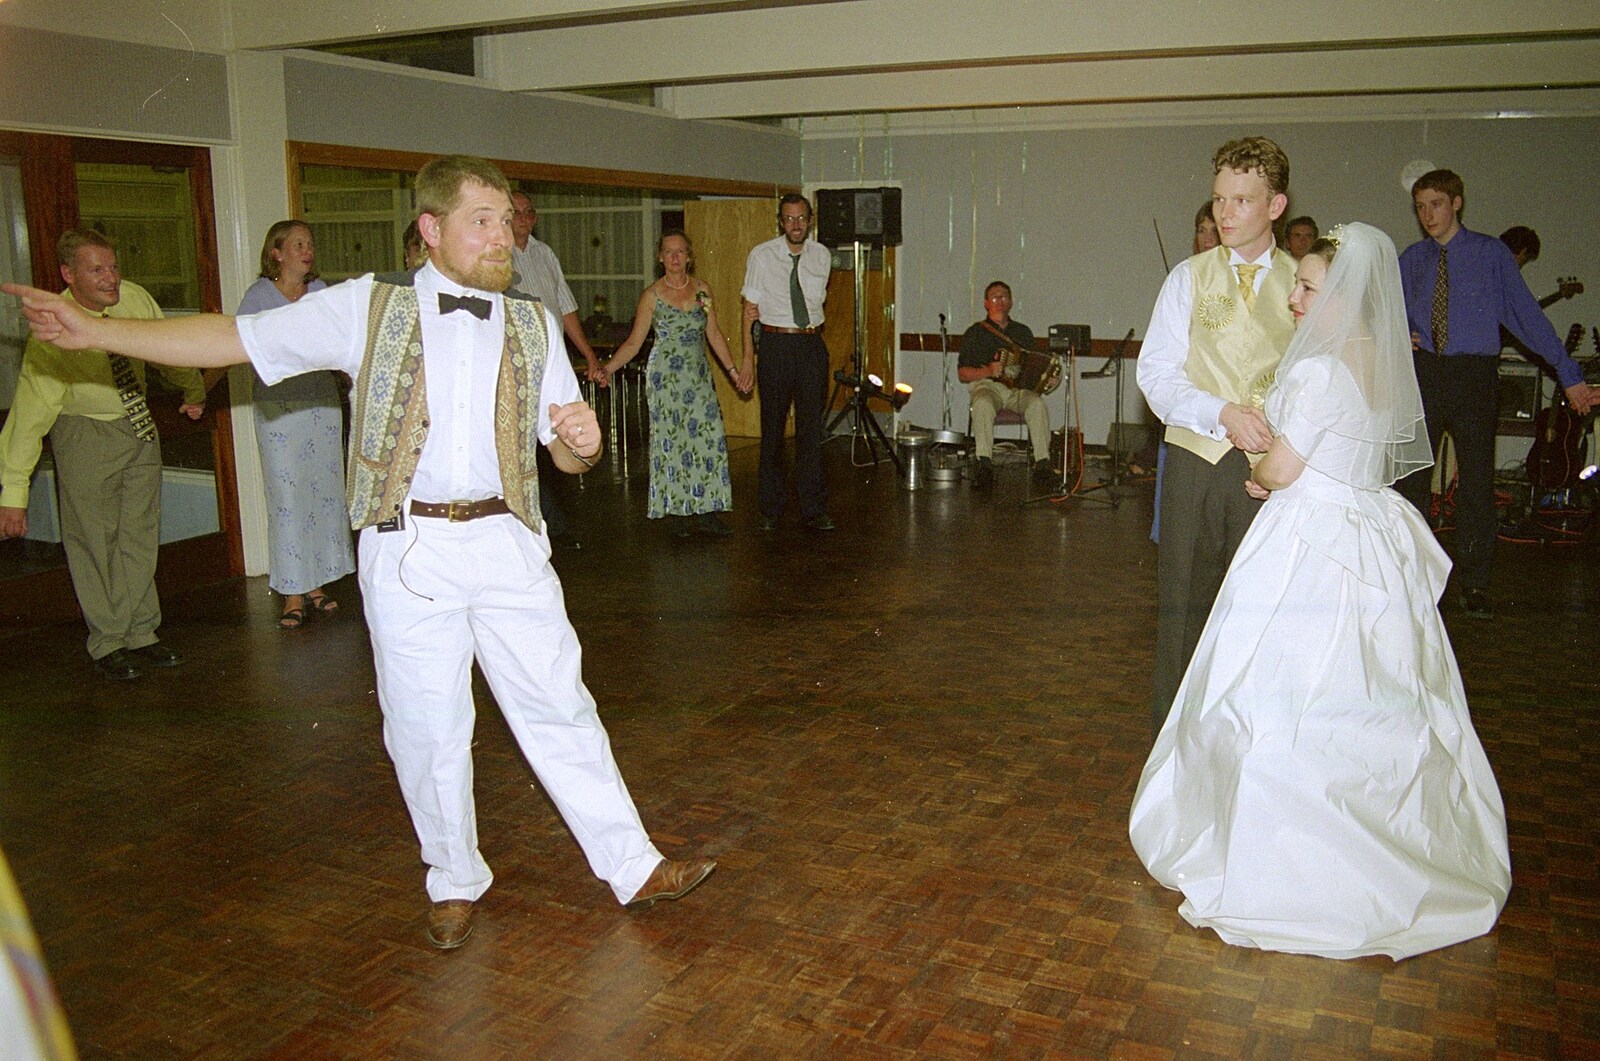 Some funky moves from Joe and Lesley's CISU Wedding, Ipswich, Suffolk - 30th July 1998